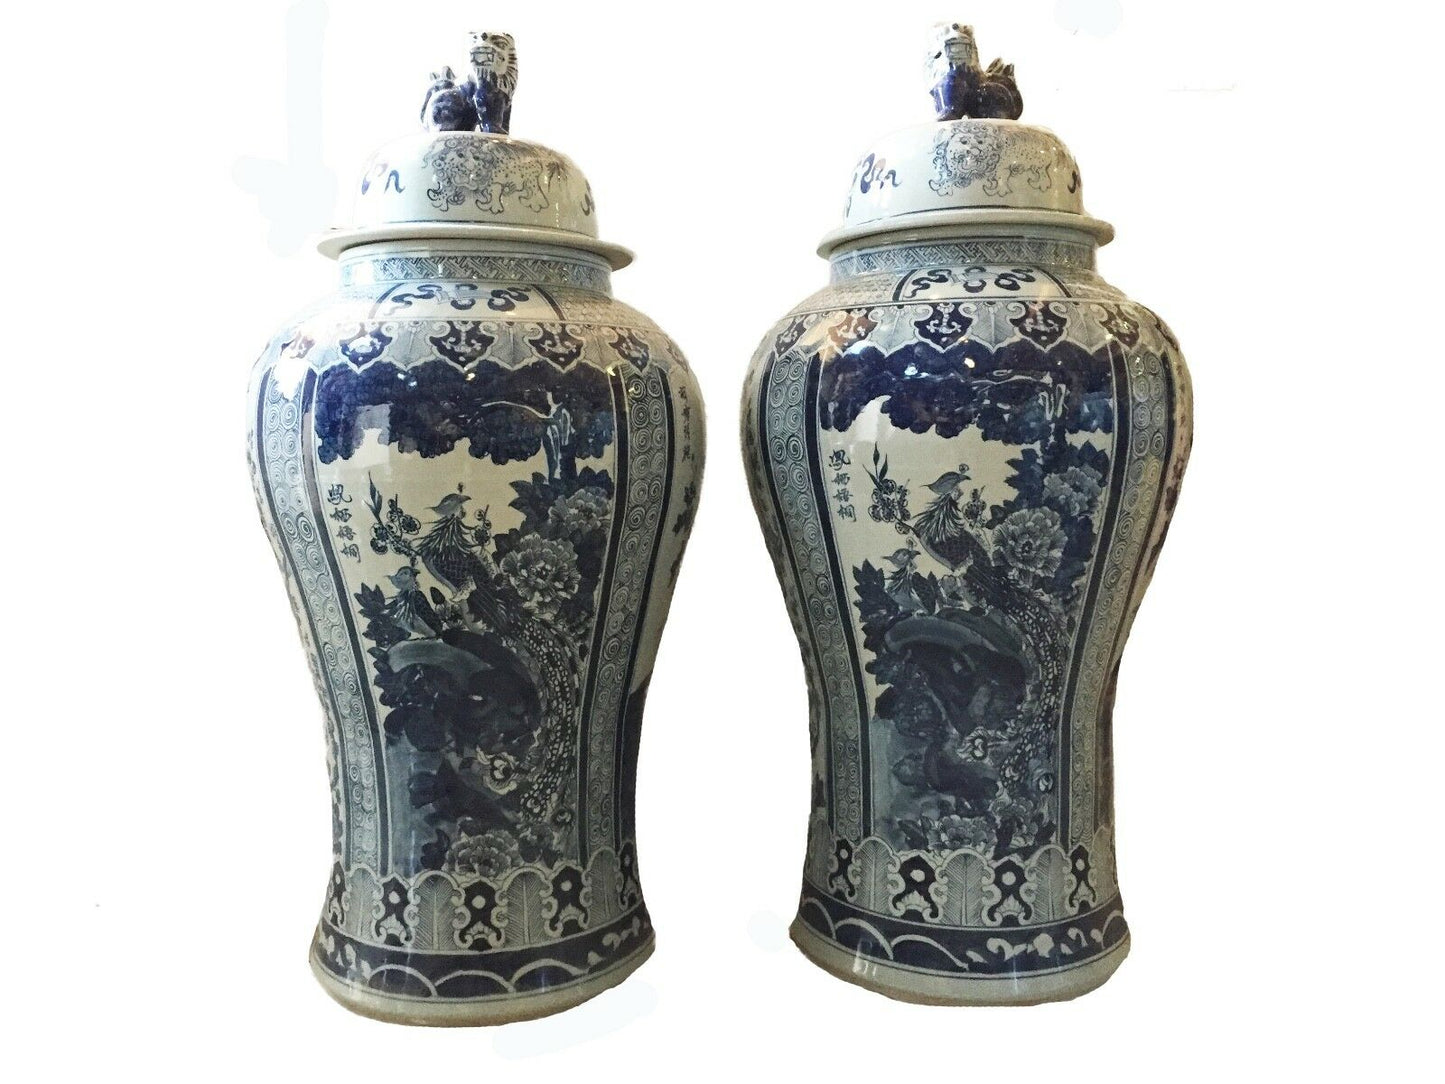 #929 Mansion Size Chinoiserie B & W Porcelain Ginger Jars - a Pair 47" H